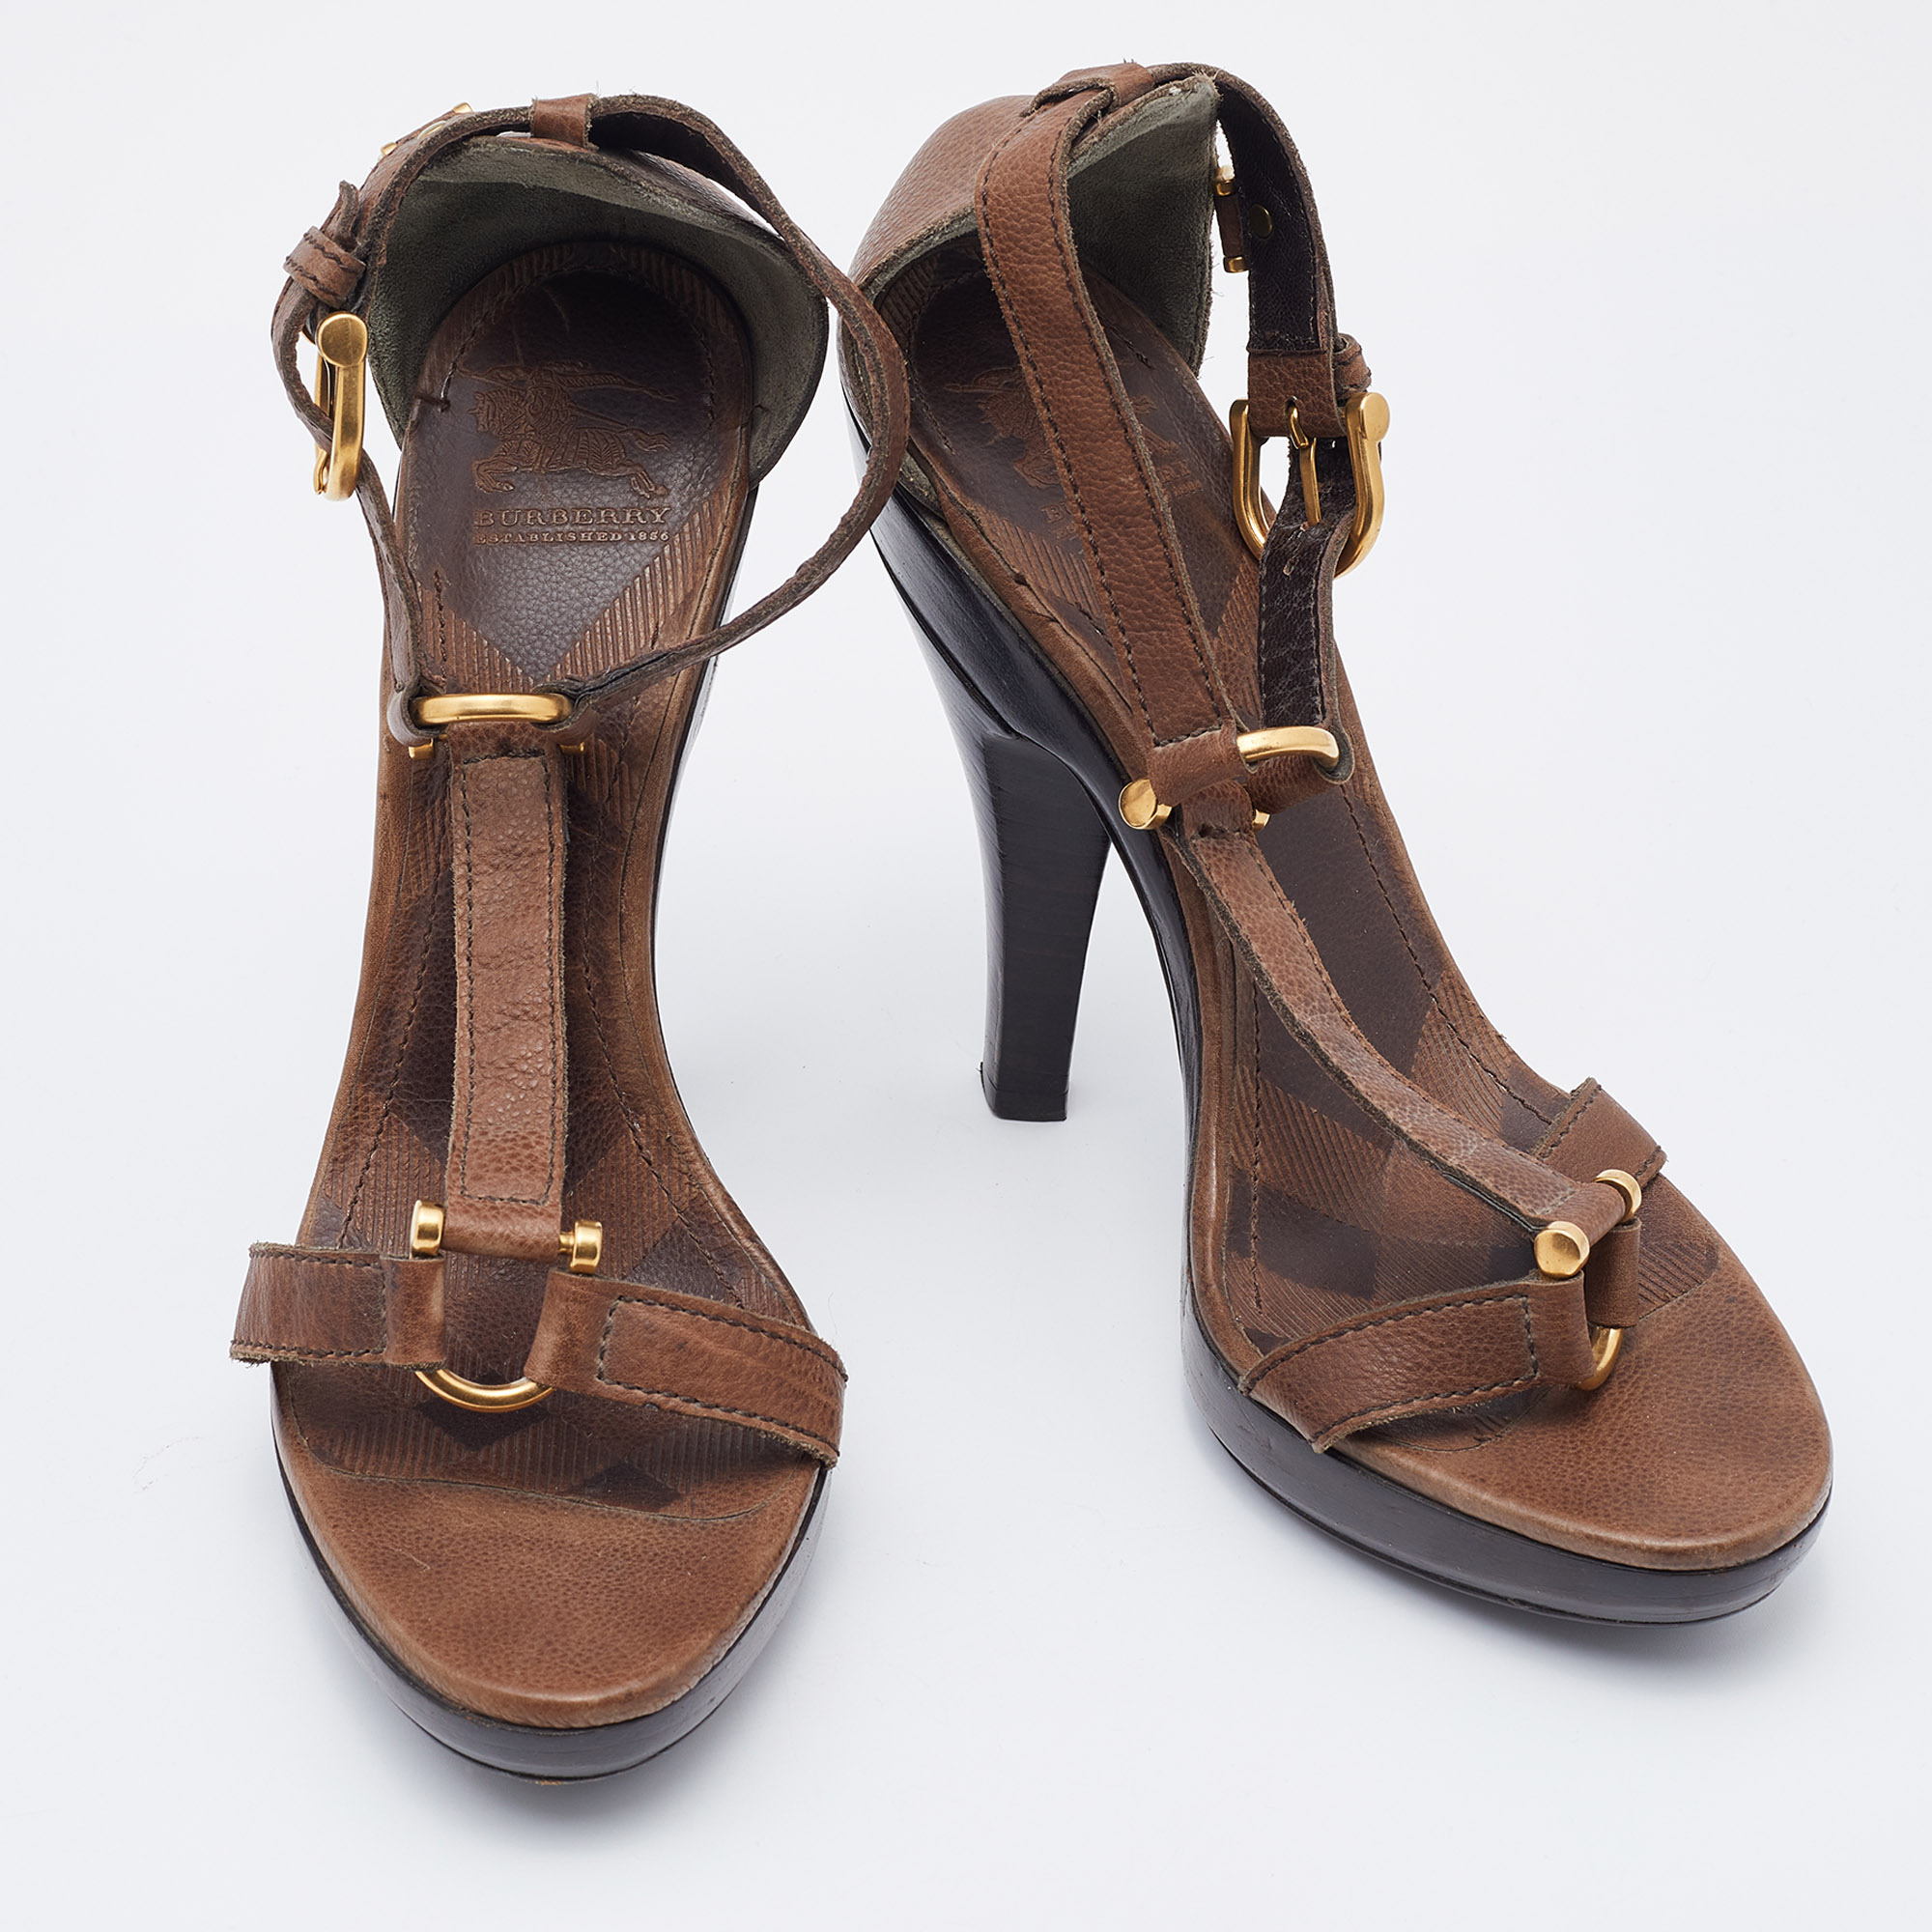 Burberry Brown Leather Ankle Strap Platform Sandals Size 37